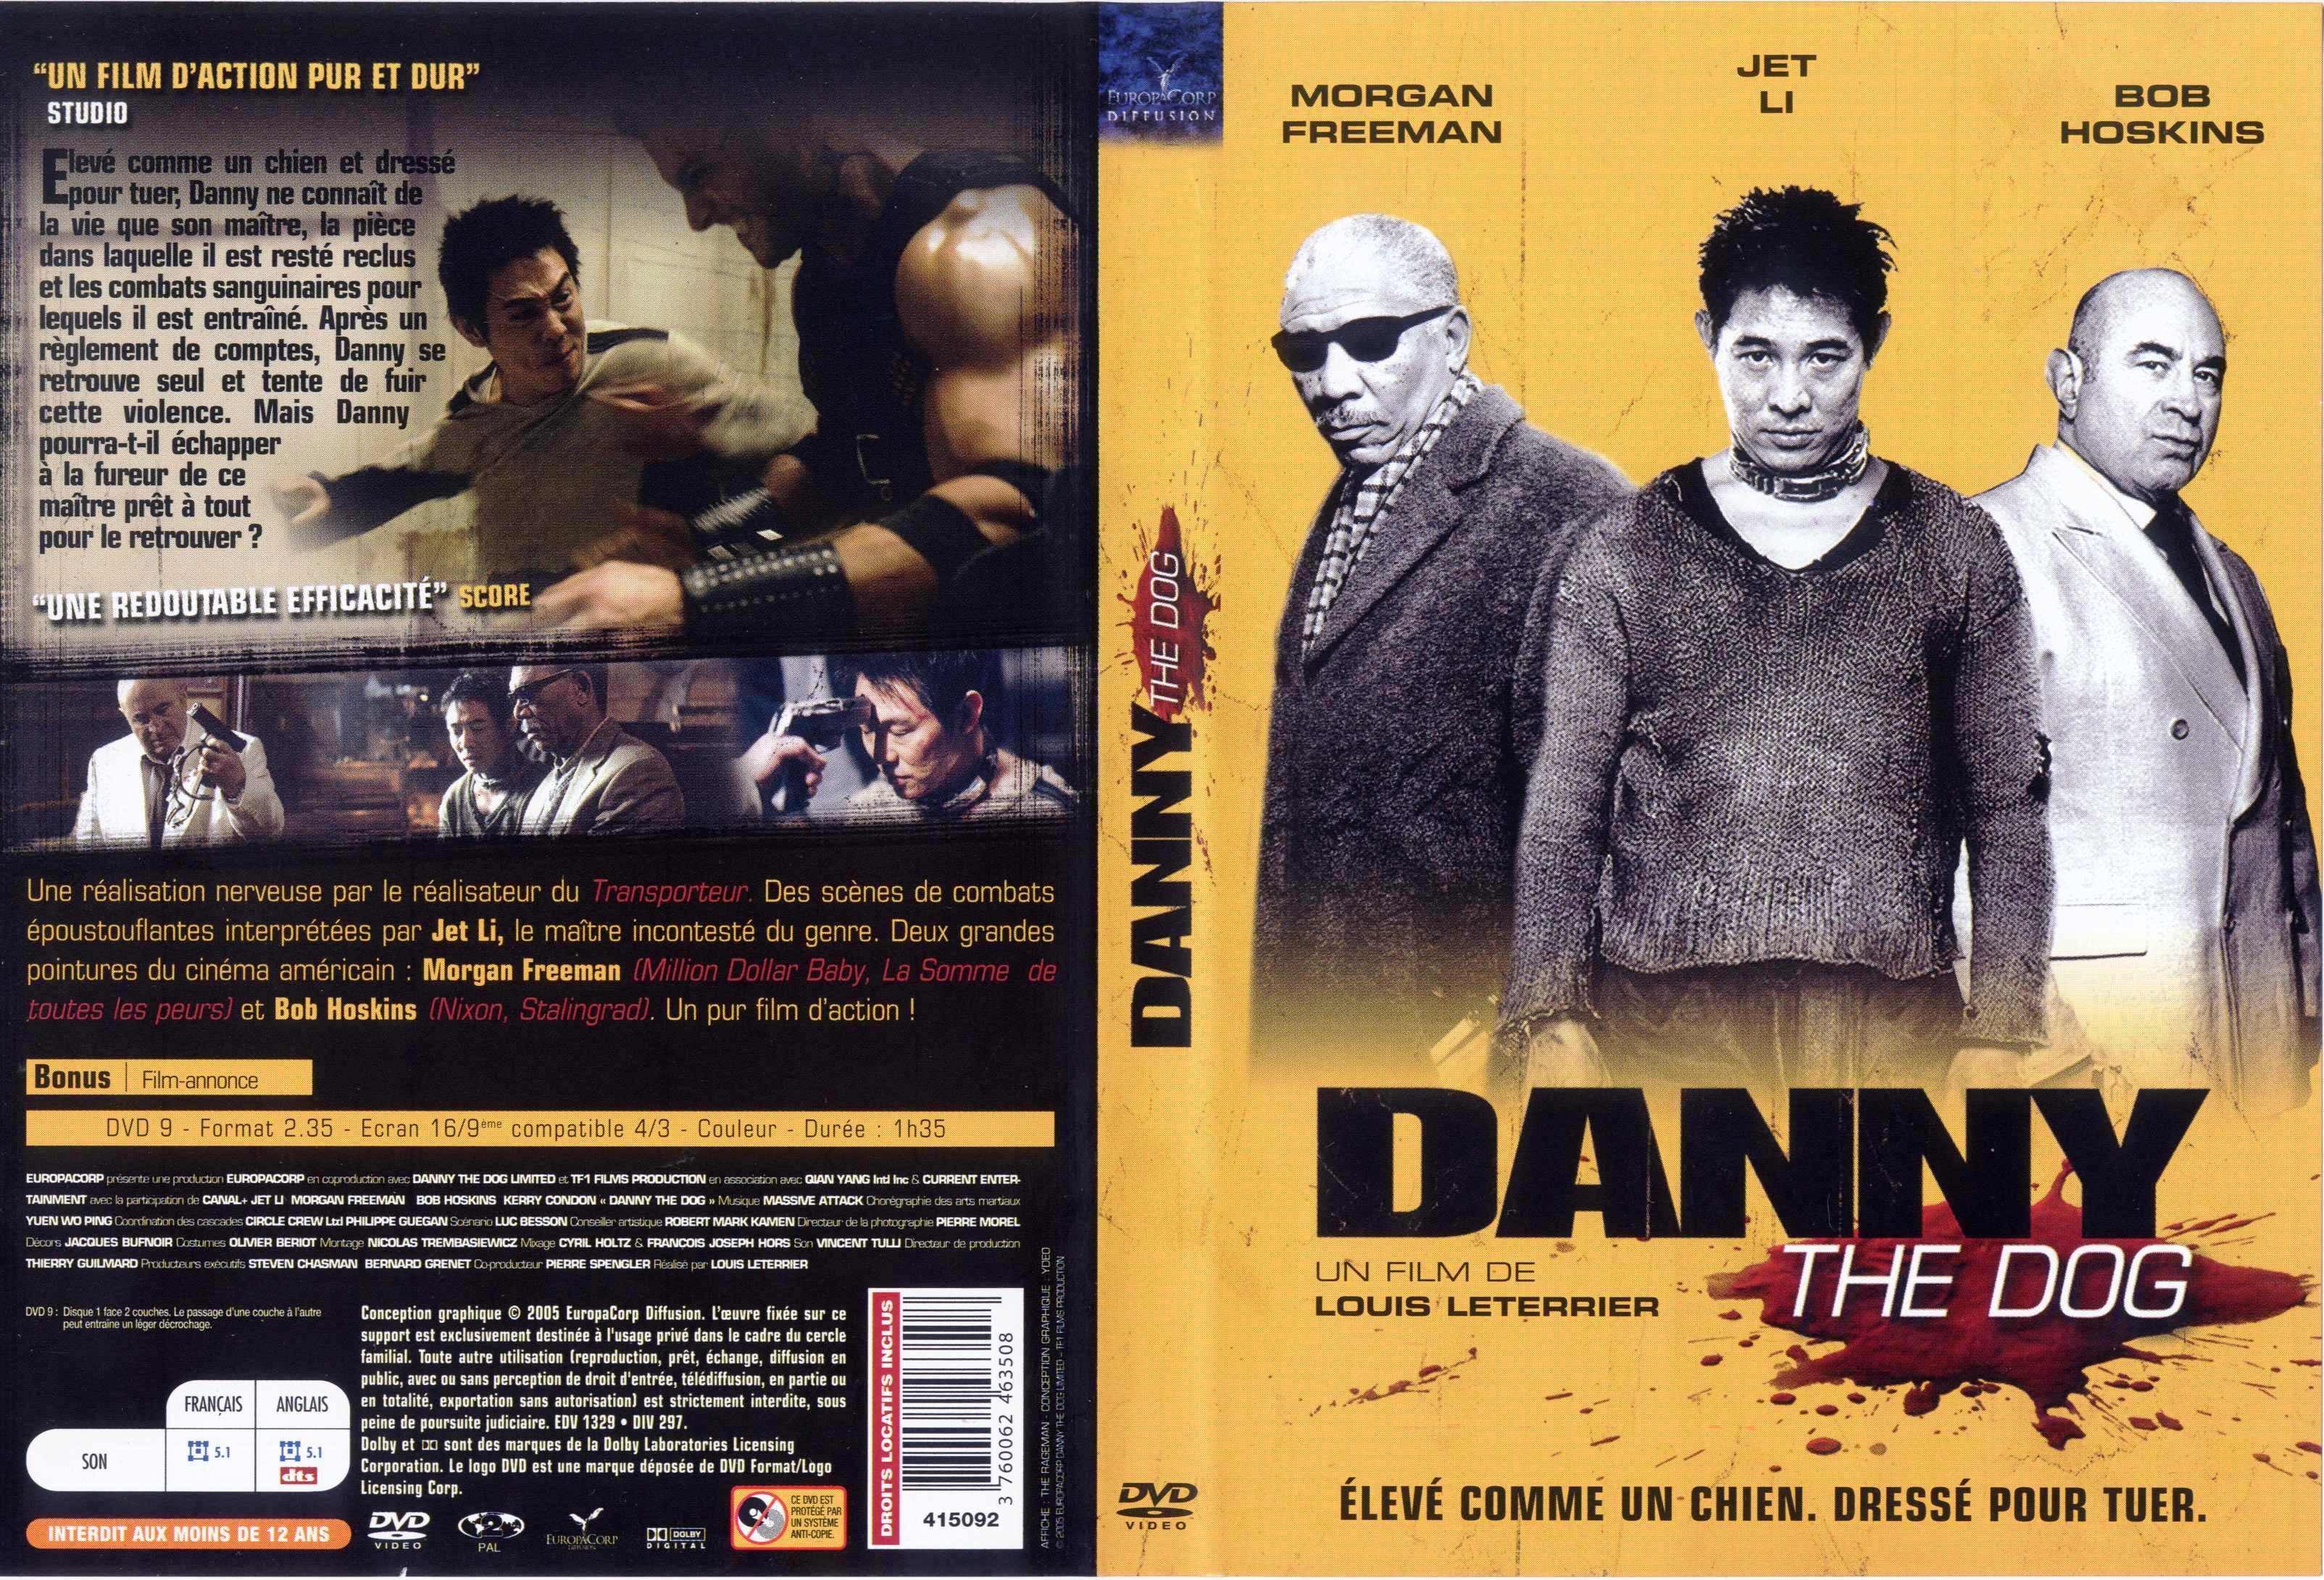 Jaquette DVD Danny the dog